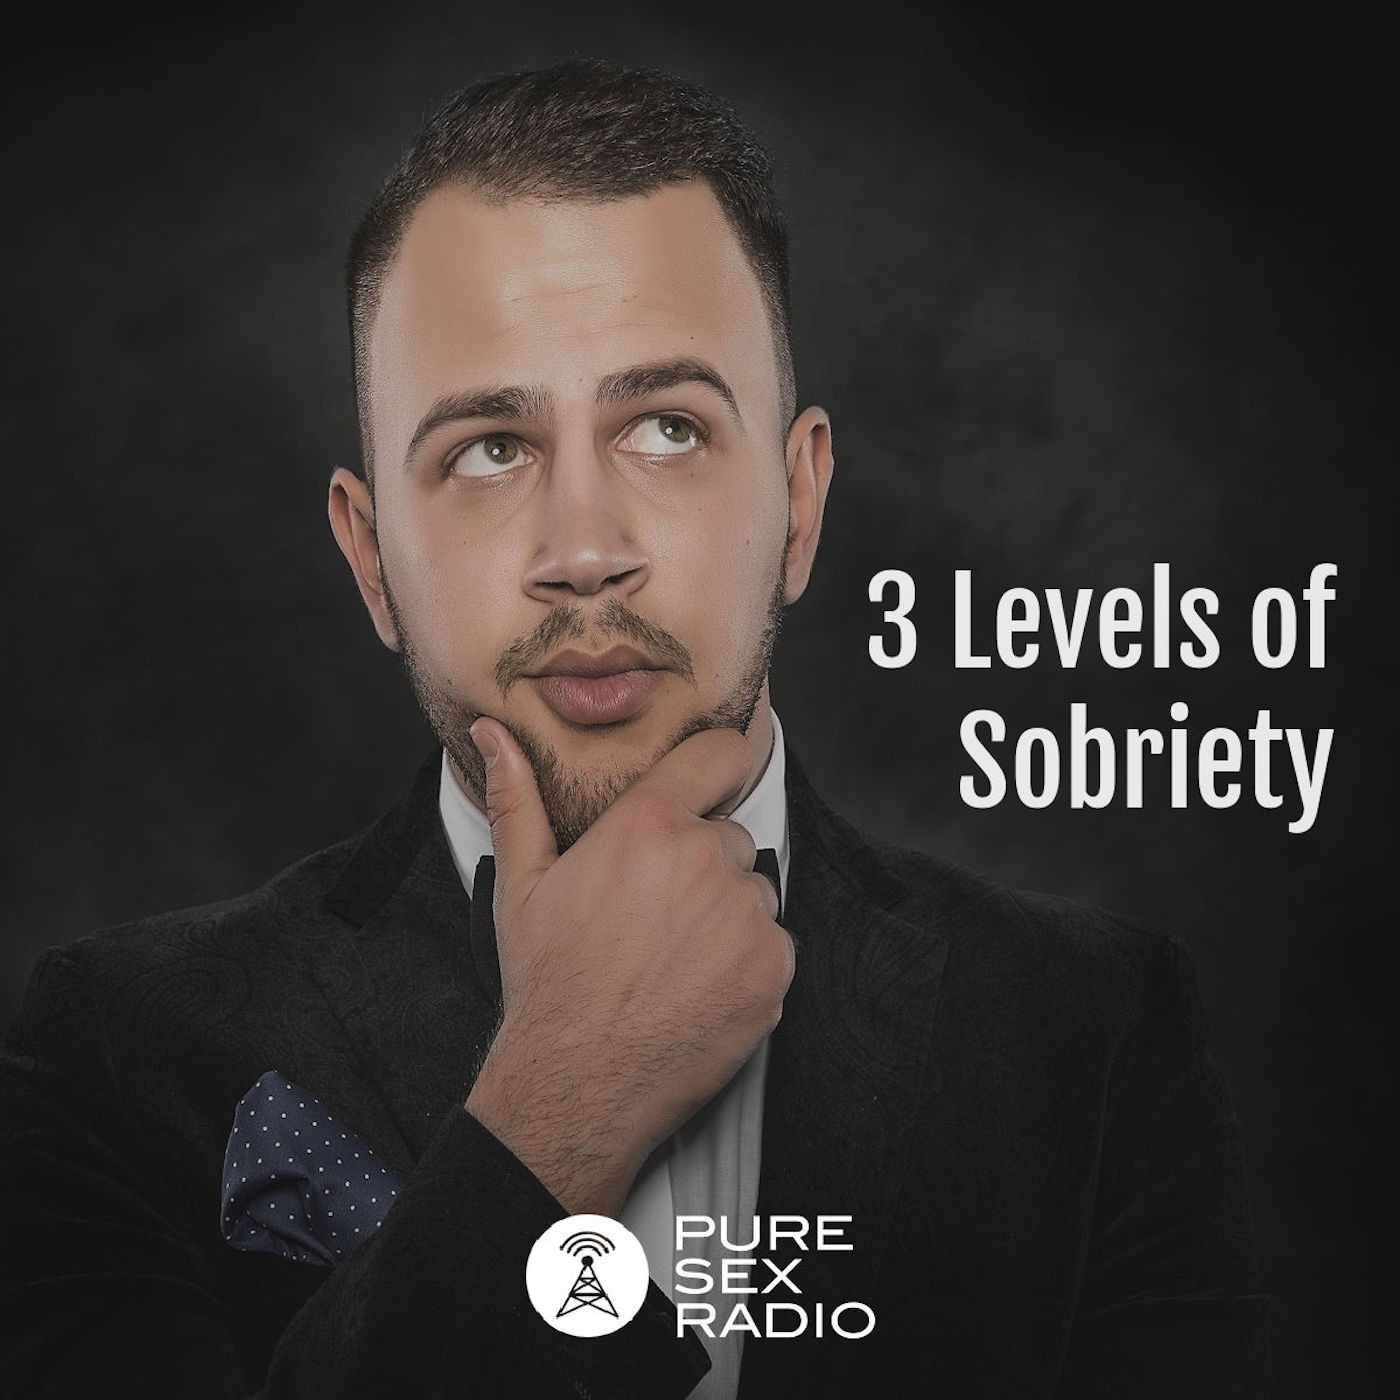 Best of 2022: 3 Levels of Sobriety